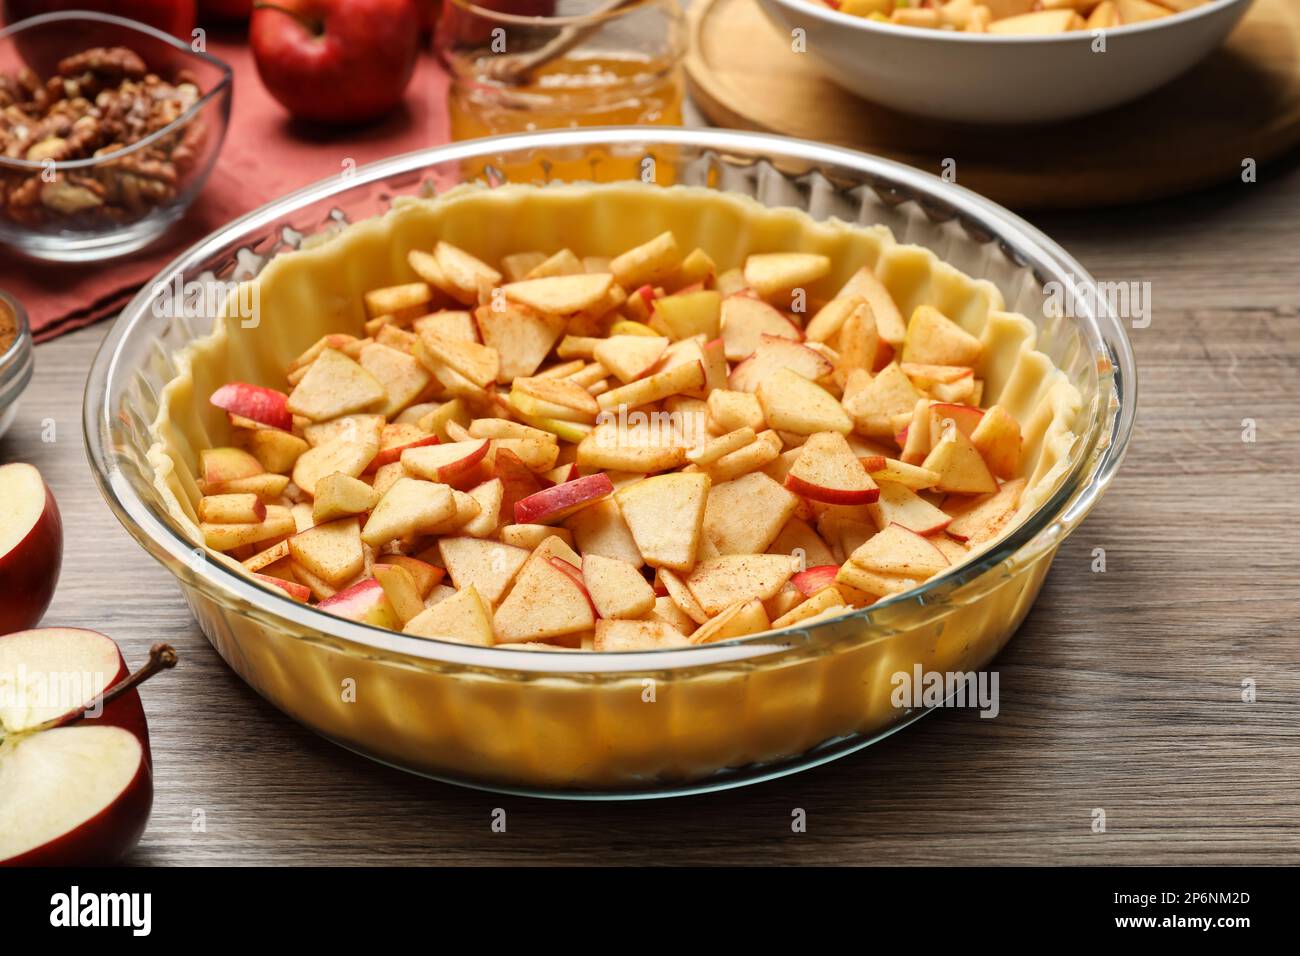 Raw dough with apple slices on wooden table, closeup. Baking pie Stock Photo